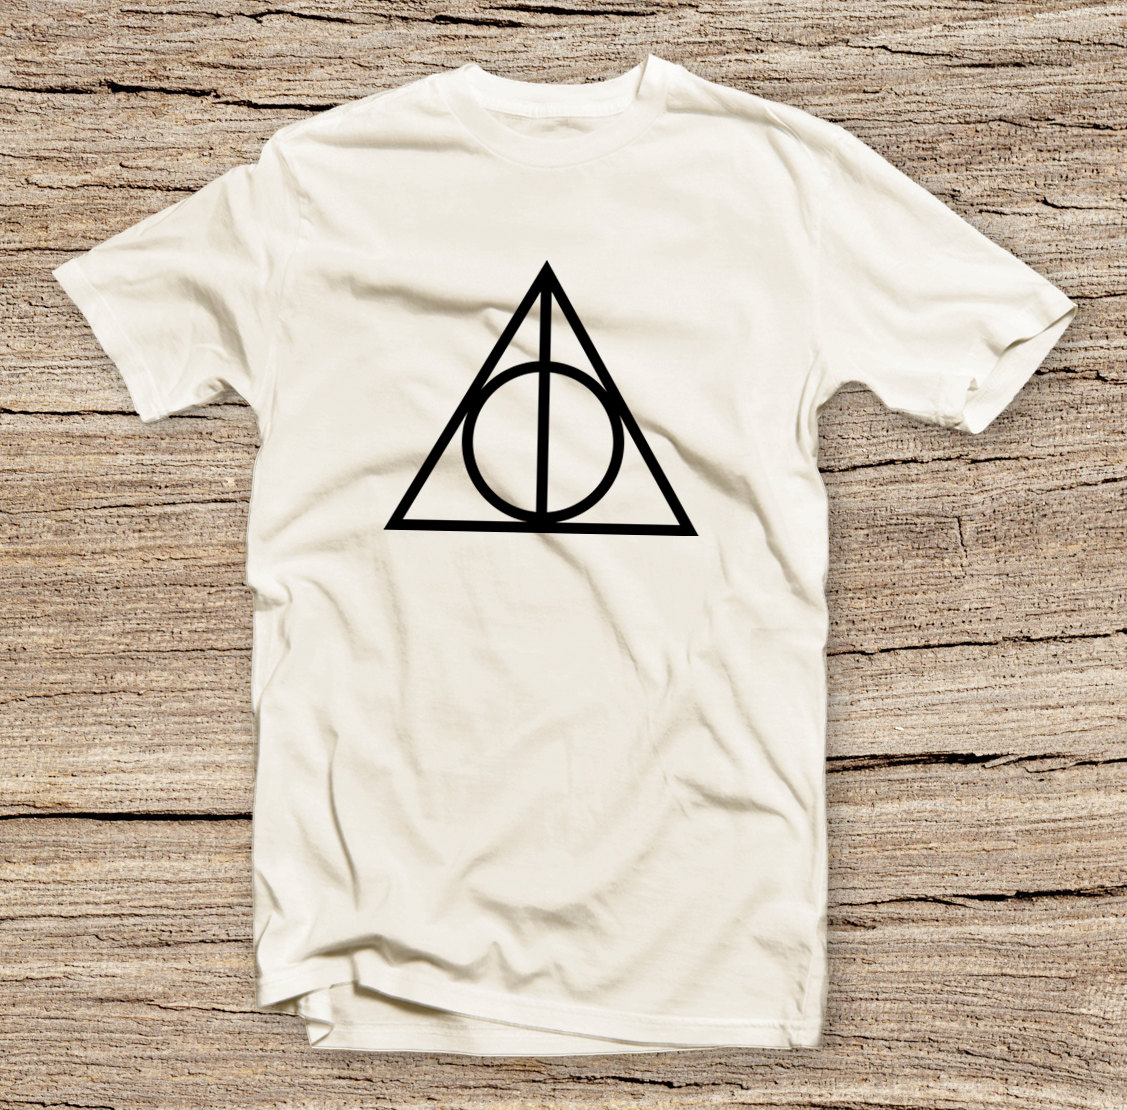 Pts-035 The Symbol Of The Deathly Hallows, Fashion Style Printed T-shirt